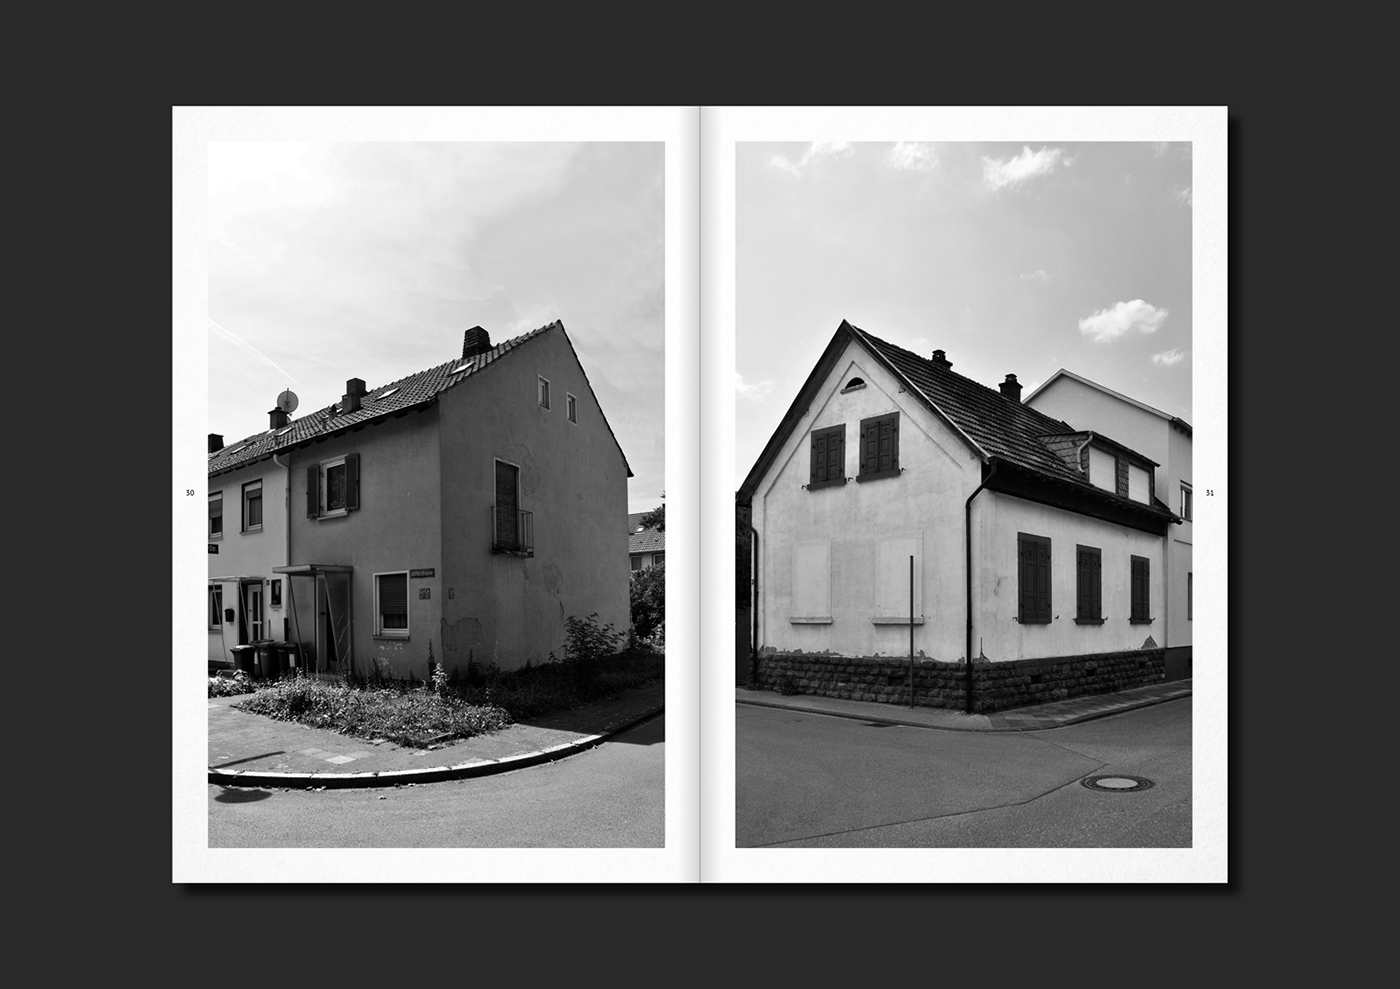 ludwigshafen architecture city Urban studies photographic series bernd hilla becher houses buildings